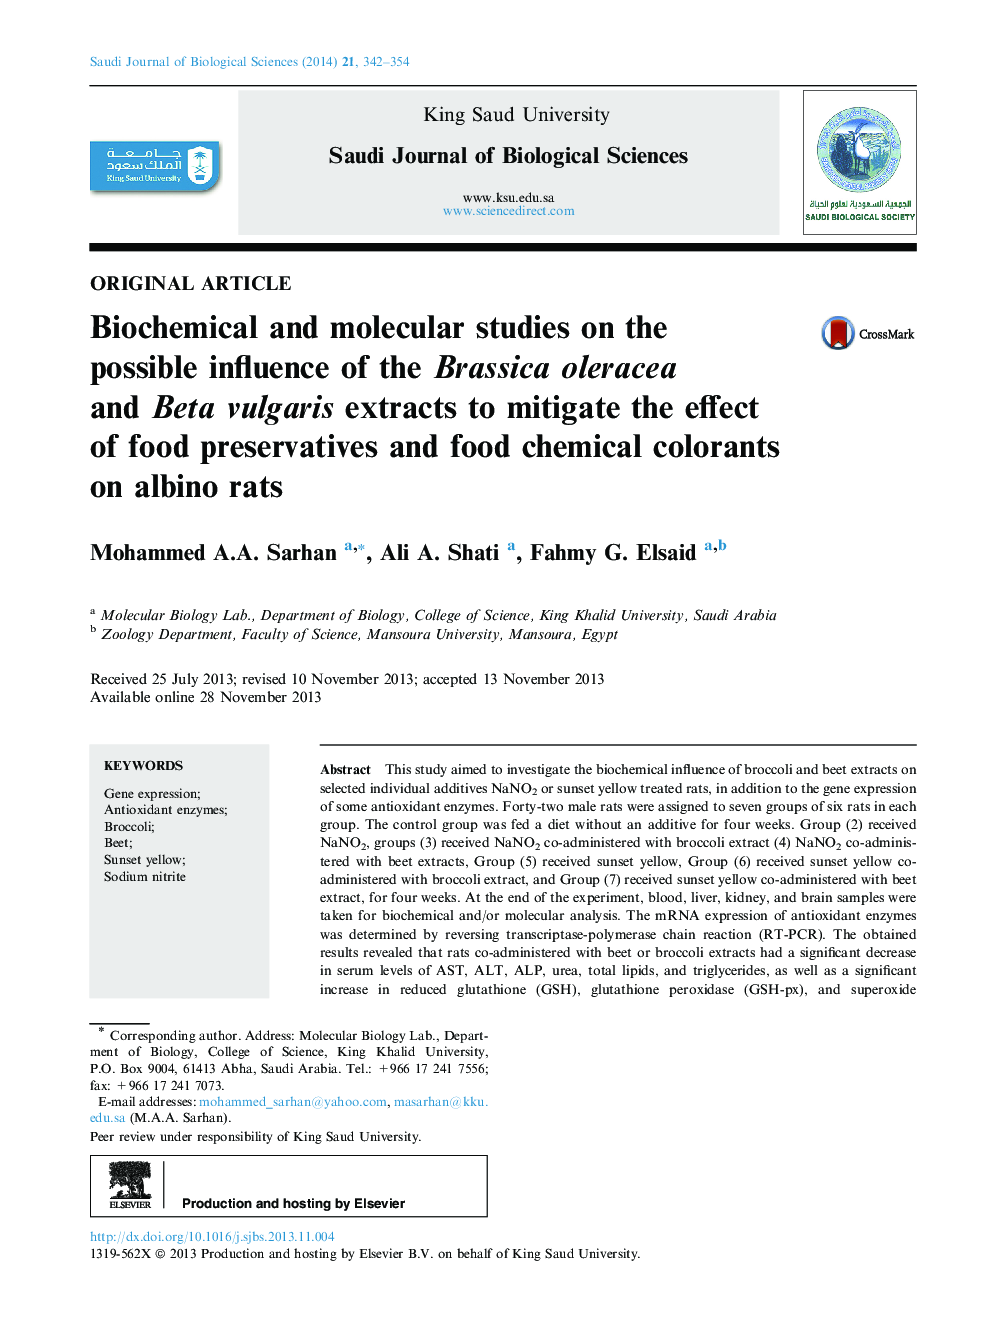 Biochemical and molecular studies on the possible influence of the Brassica oleracea and Beta vulgaris extracts to mitigate the effect of food preservatives and food chemical colorants on albino rats 